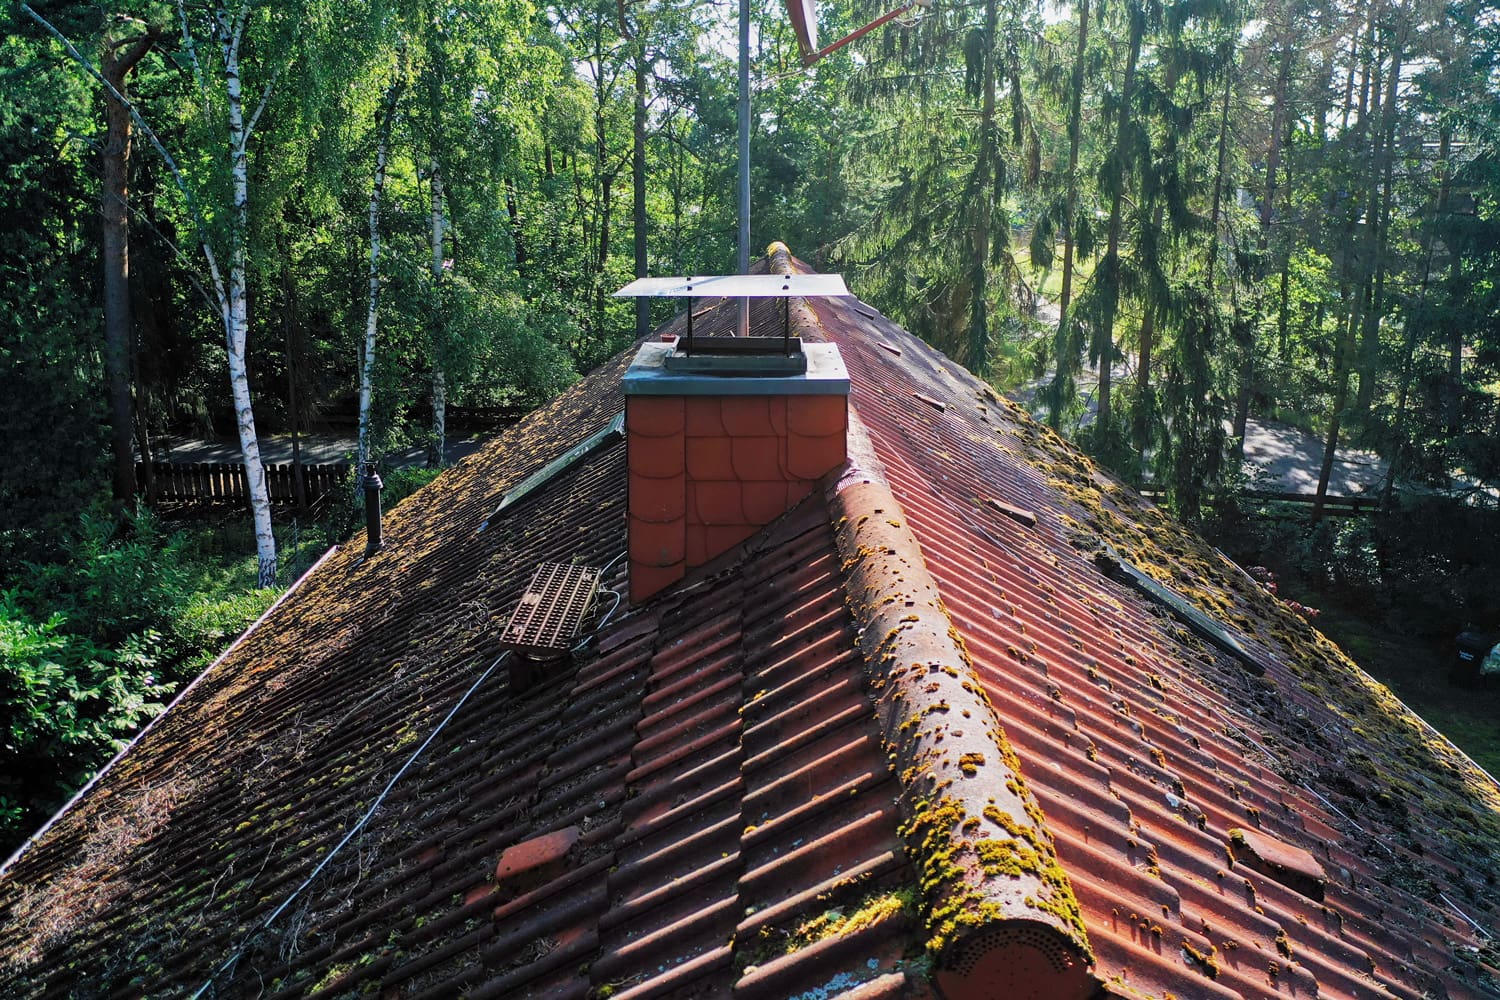 Pictures of the inspection and control of the chimney and the roof of a single family house with a drone, aerial photograph